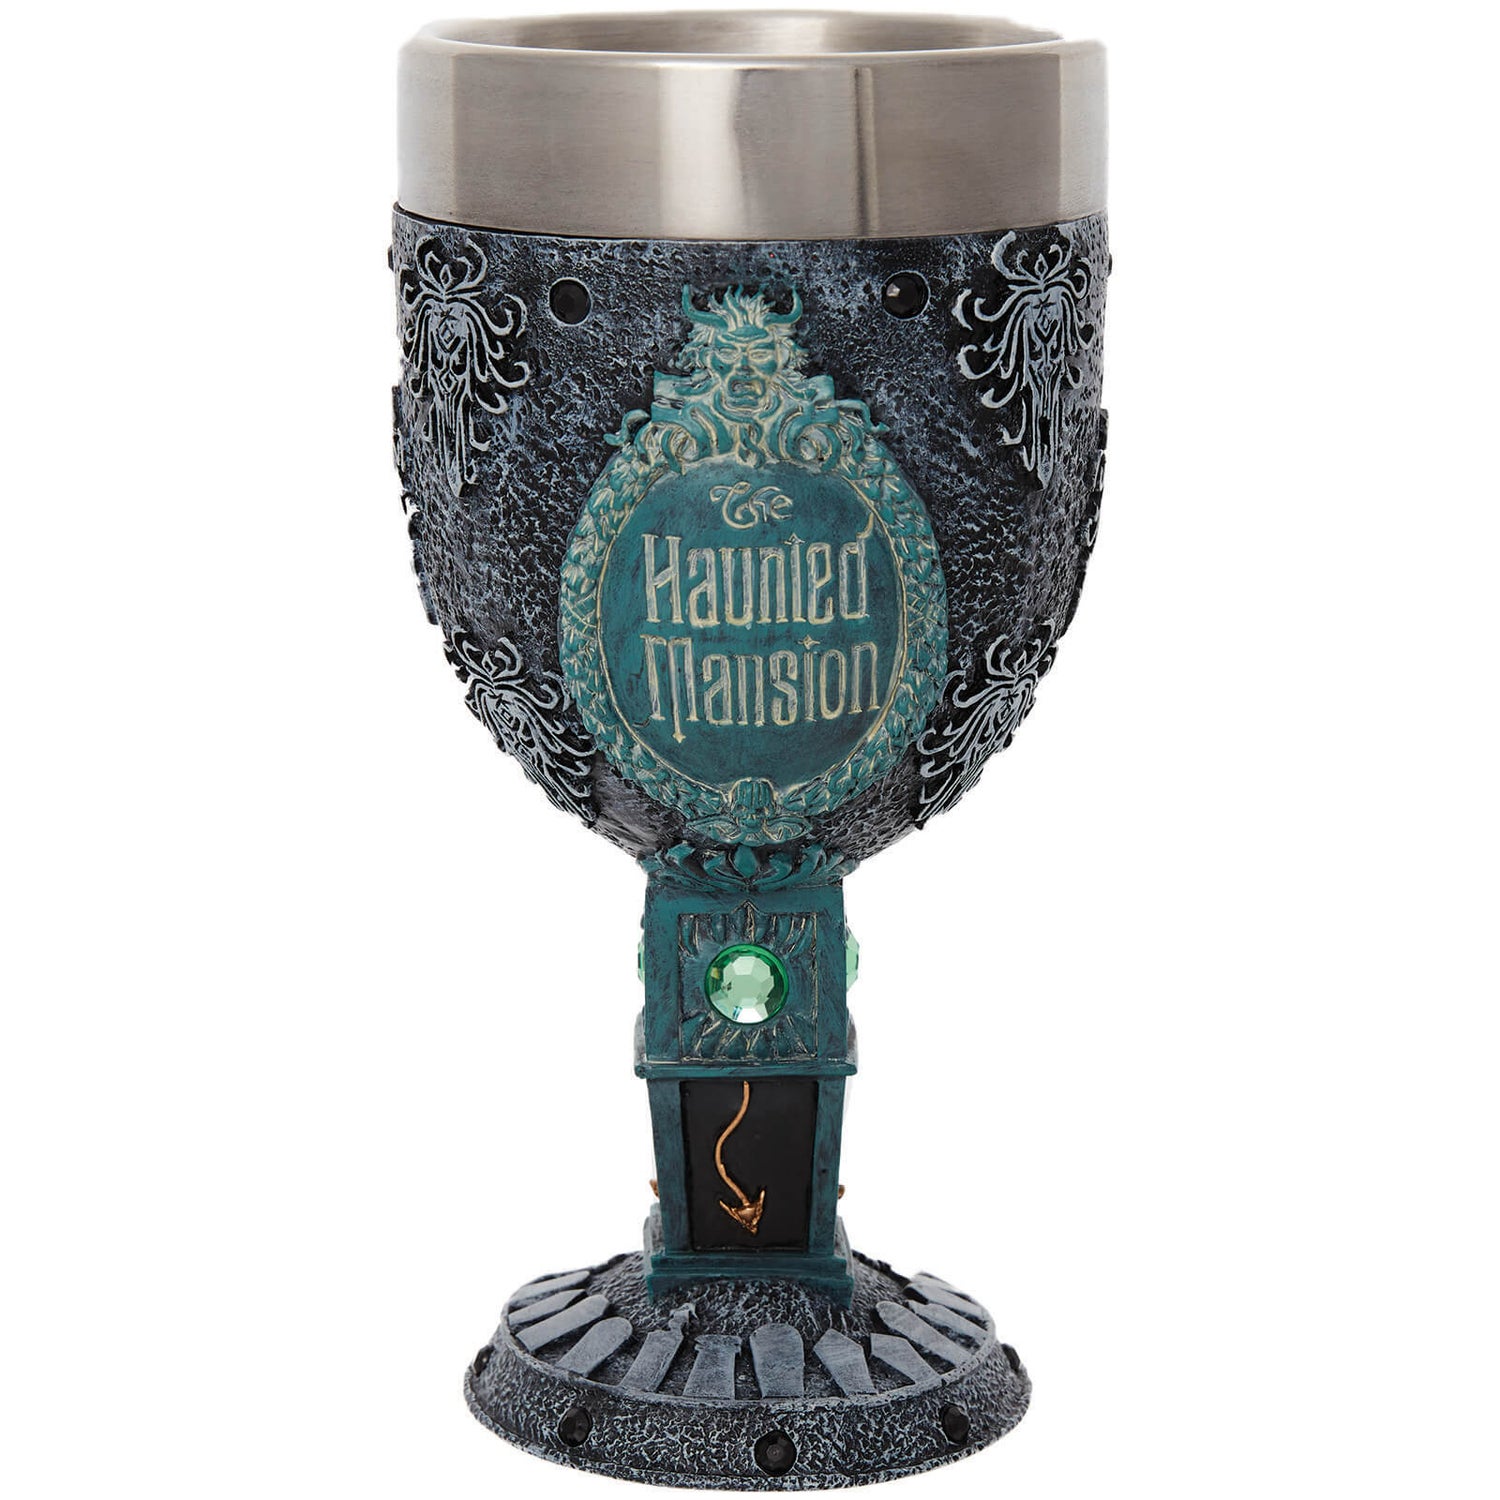 Disney Showcase Collection Haunted Mansion Goblet